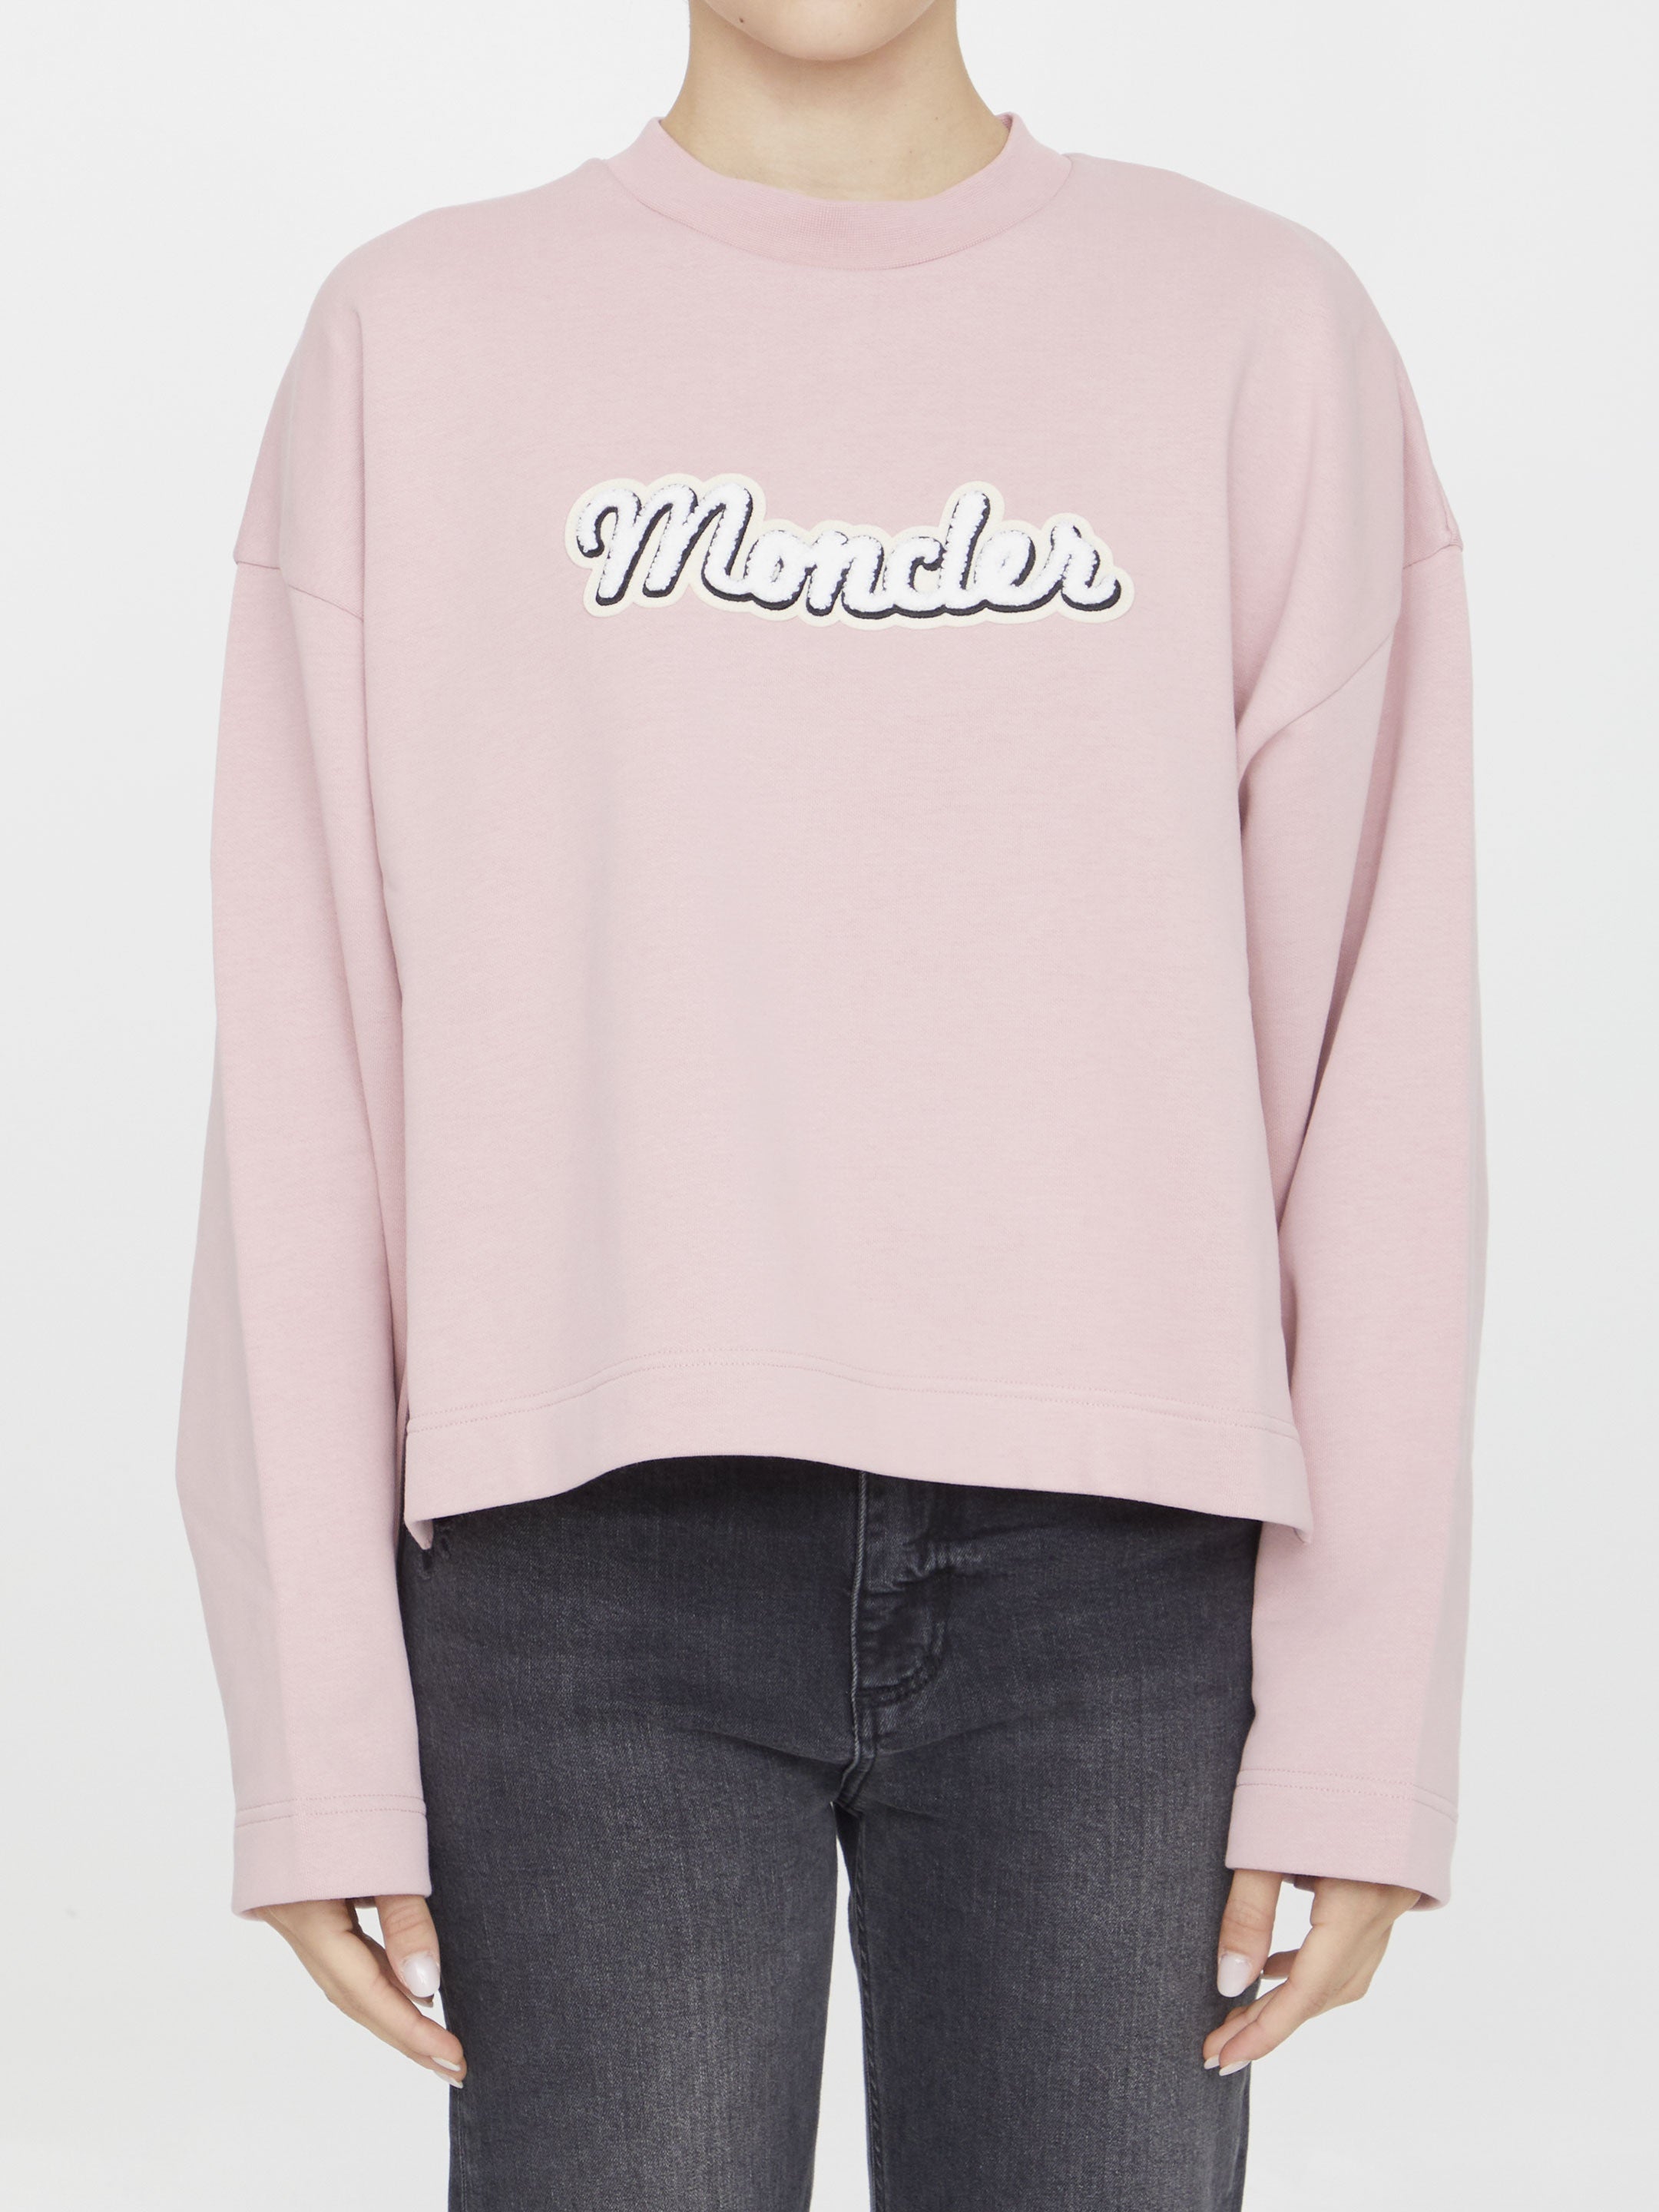 MONCLER-OUTLET-SALE-Cotton-sweatshirt-with-logo-Strick-M-PINK-ARCHIVE-COLLECTION.jpg